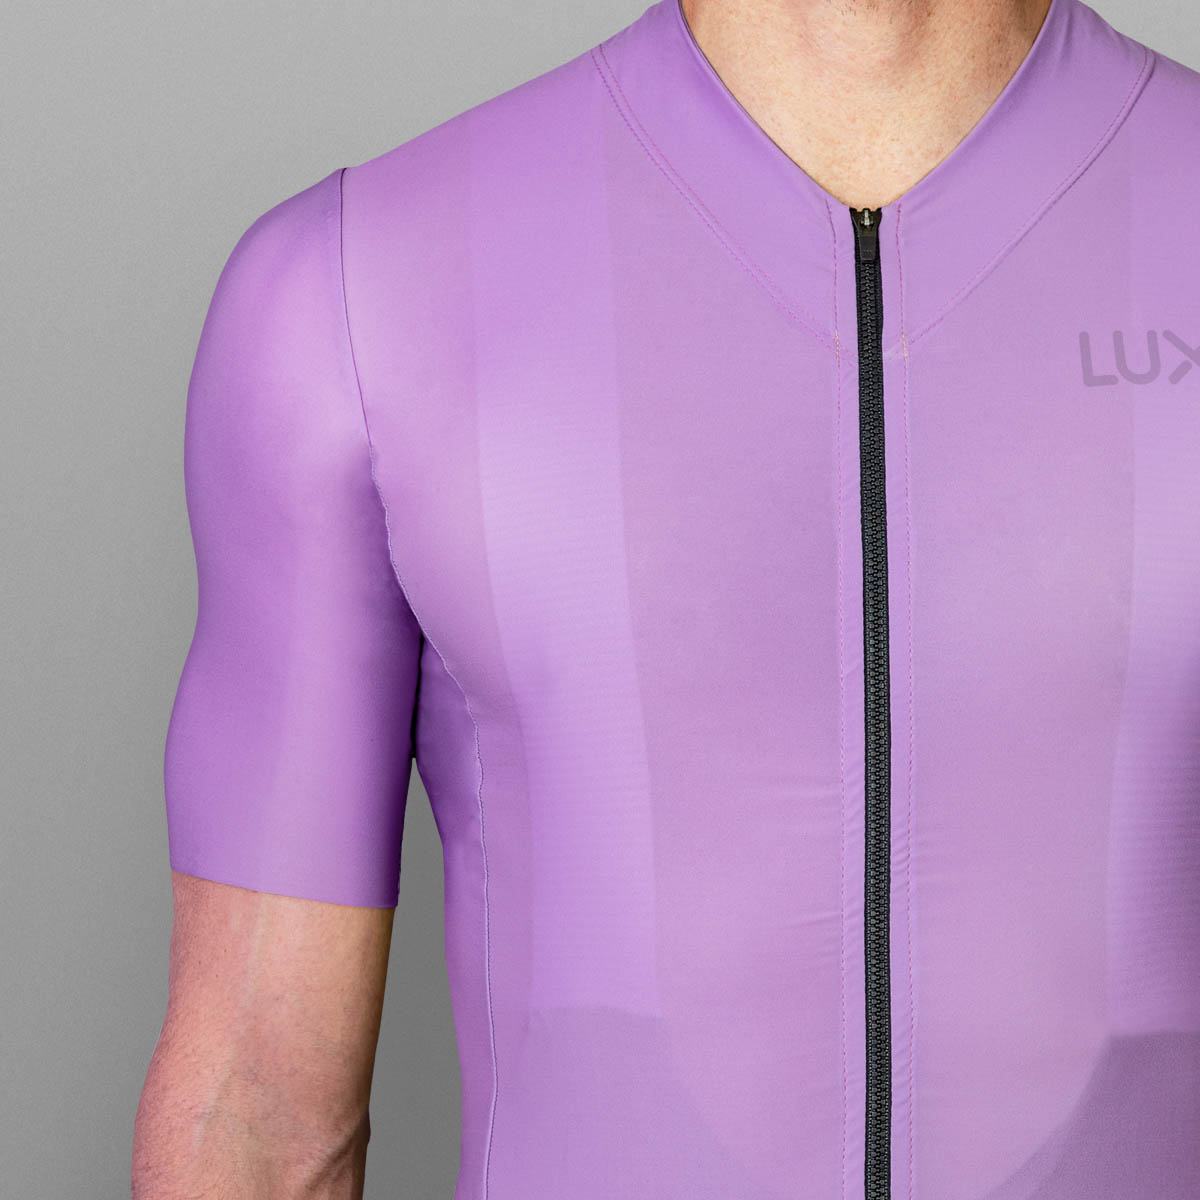 violet men's cycling jersey made by Luxa in Europe (EU)